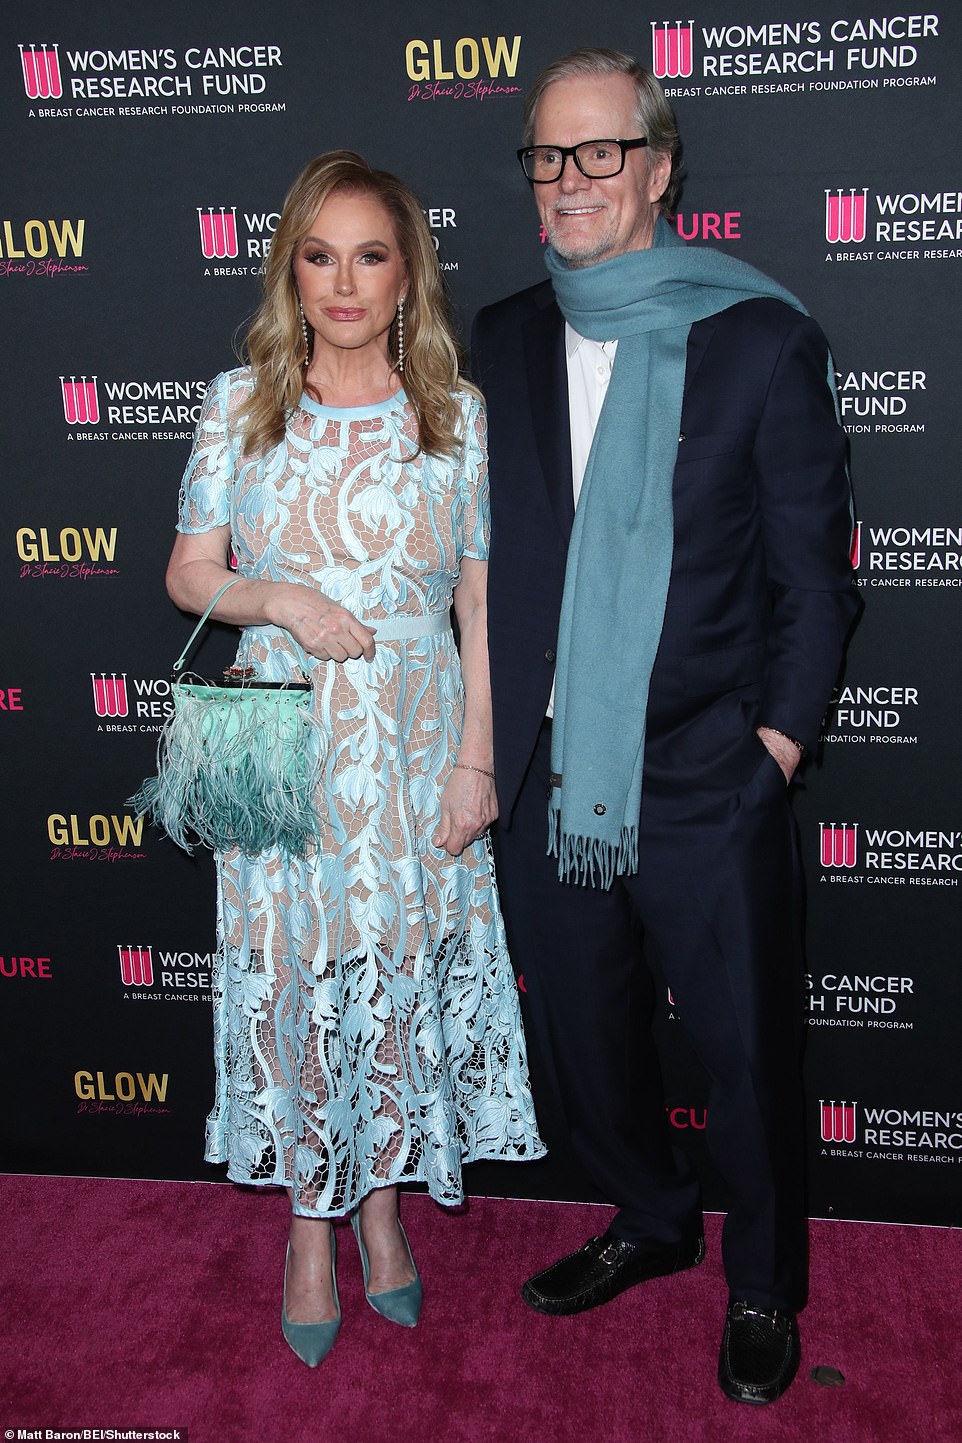 The mother of Paris and Nicky Hilton was accompanied at the gala by her husband Rick Hilton.  She looked elegant in a black suit and a blue-gray scarf that complemented his wife's outfit.